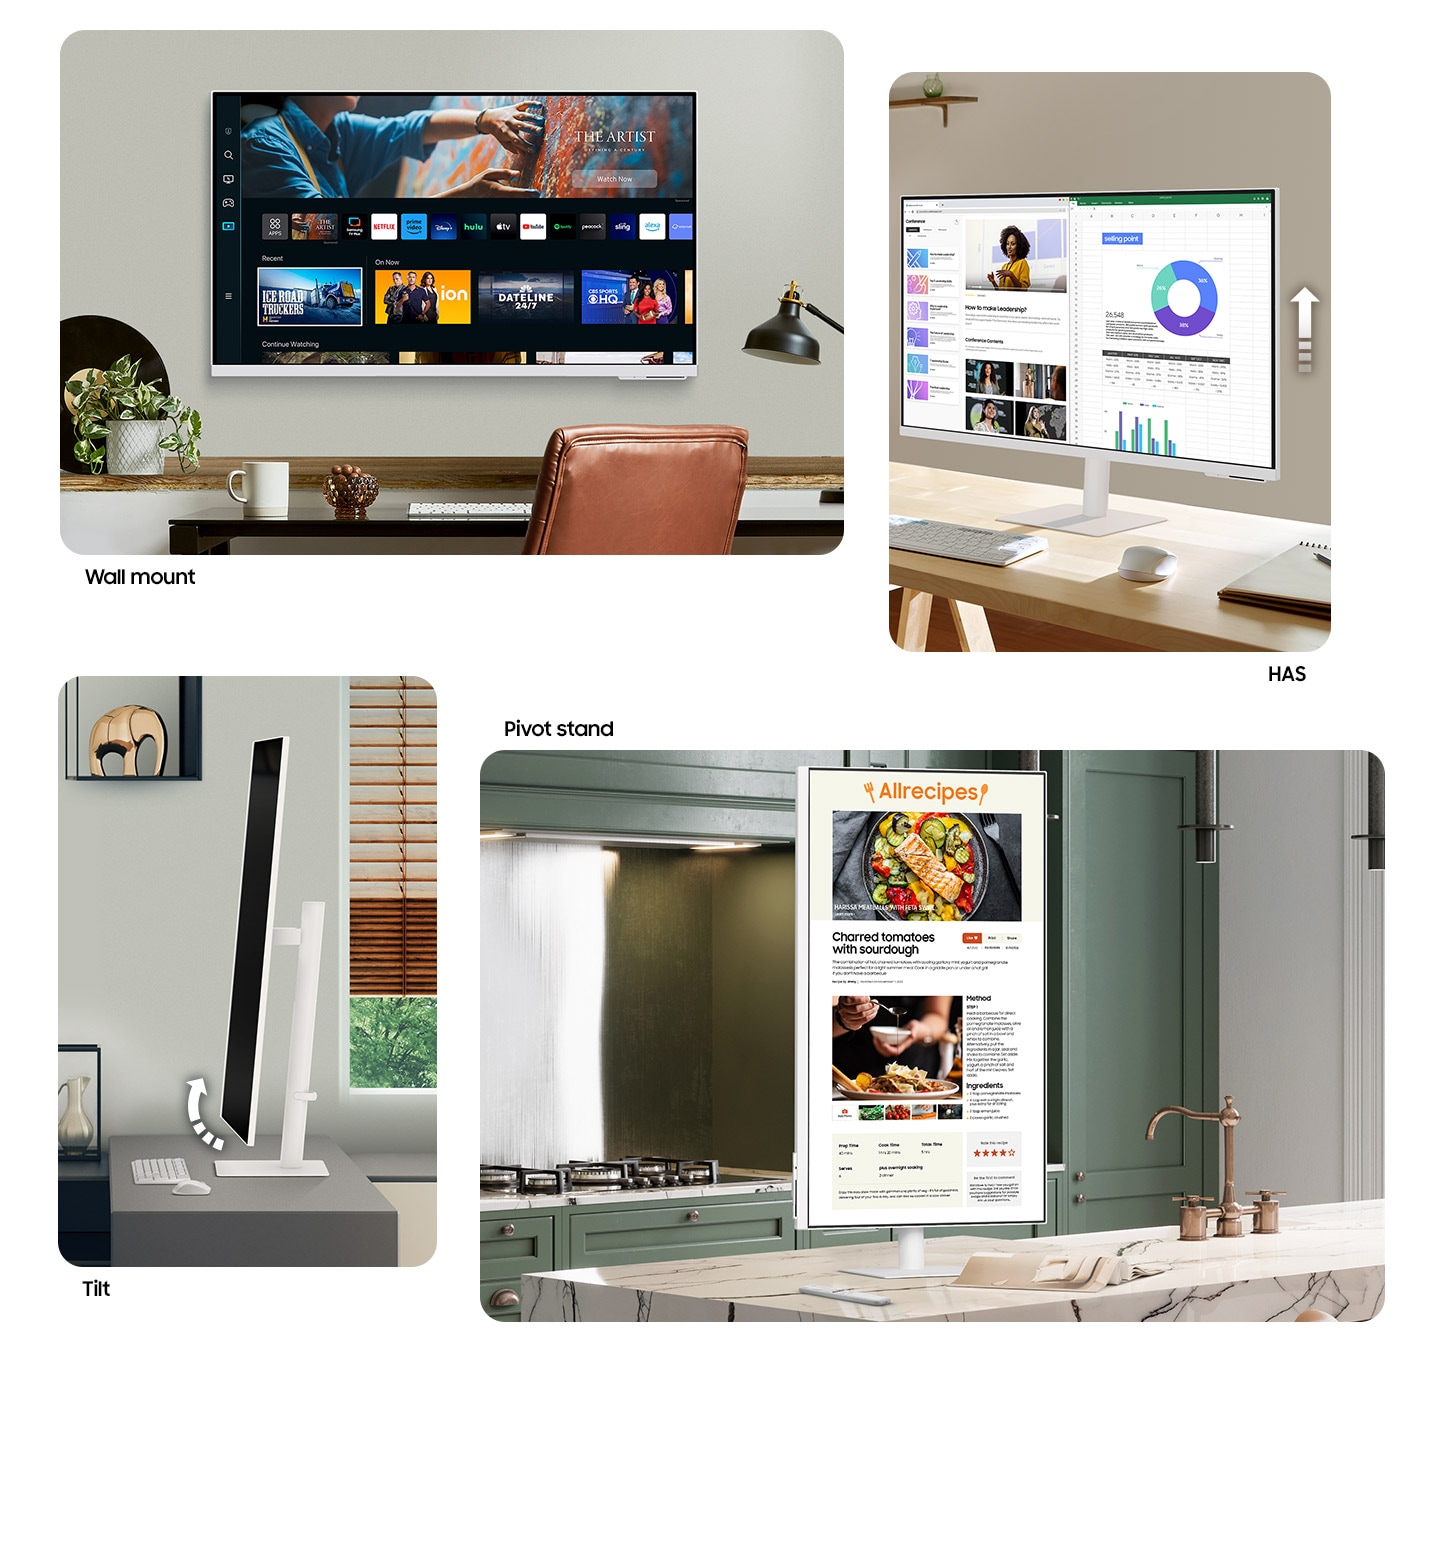 There are four Smart Monitors. The one on the upper left is hanged on the wall, meaning wall mount. And next to it, there is an upward arrow with a monitor, meaning HAS. At the bottom left, there is another monitor with rounded arrow, meaning tilt. Next to it, there is vertically pivoted monitor.